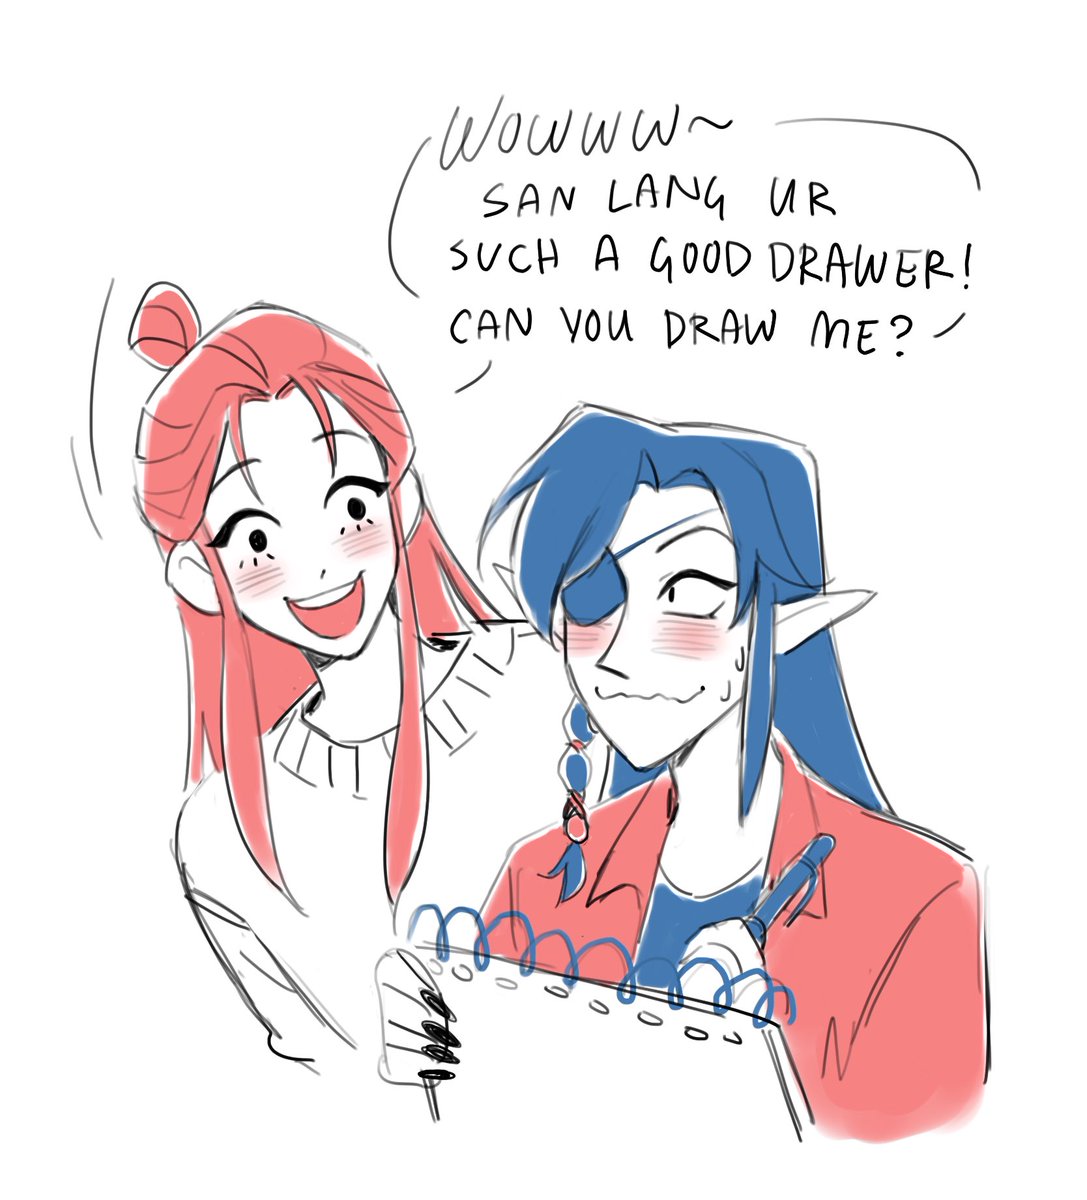 by far my favorite hua cheng character trait is that he's a weird art kid 